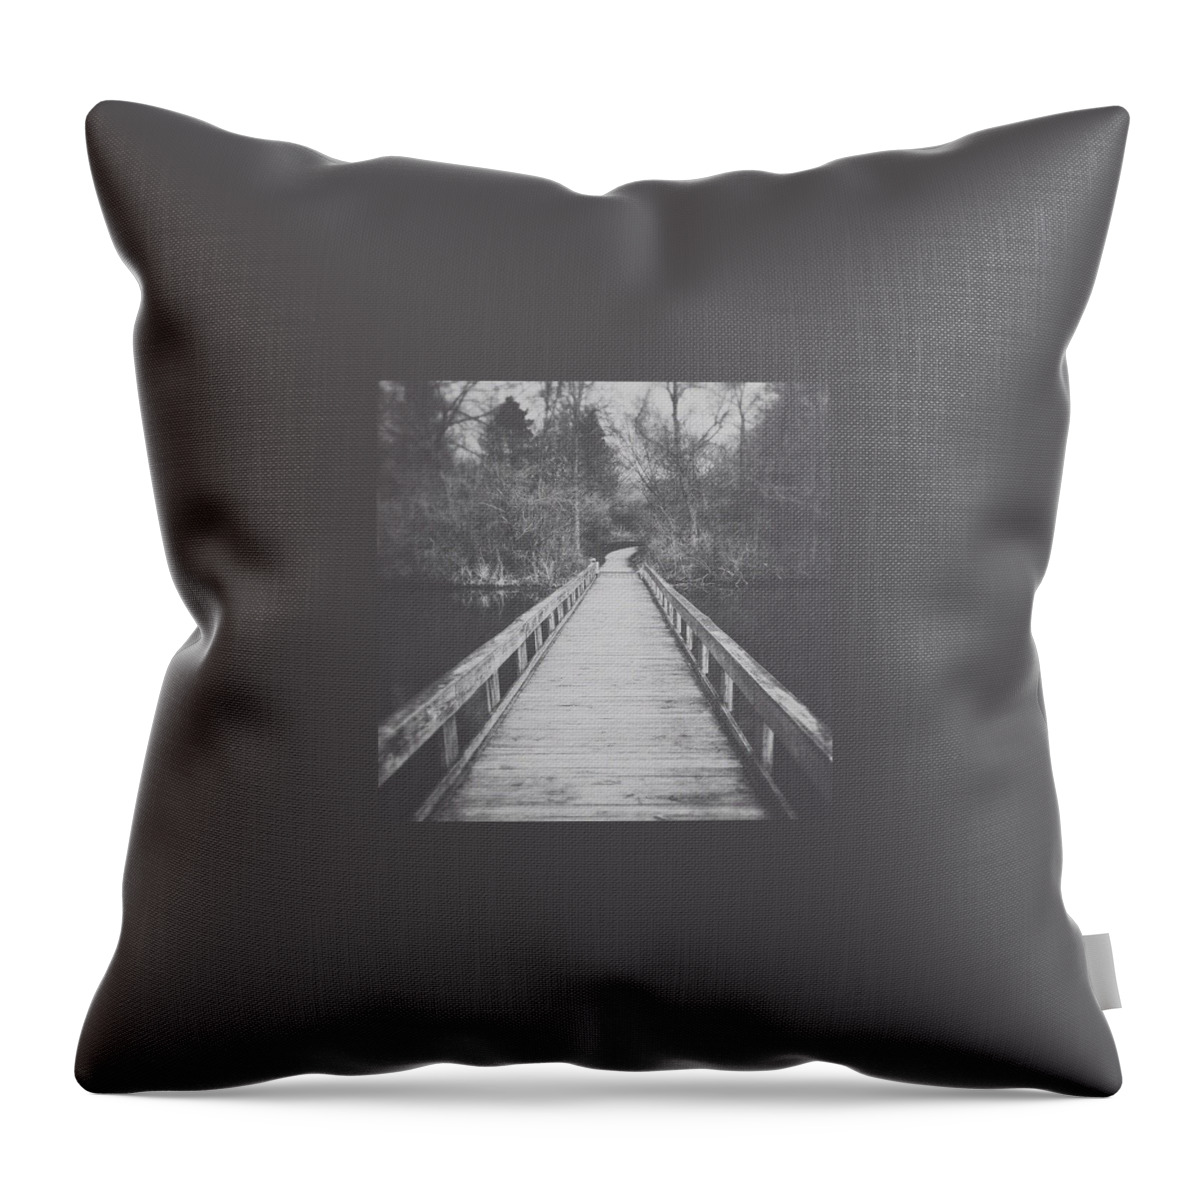 Nature Throw Pillow featuring the photograph Fishing Pier Over Worster Lake. North by Nicky Page